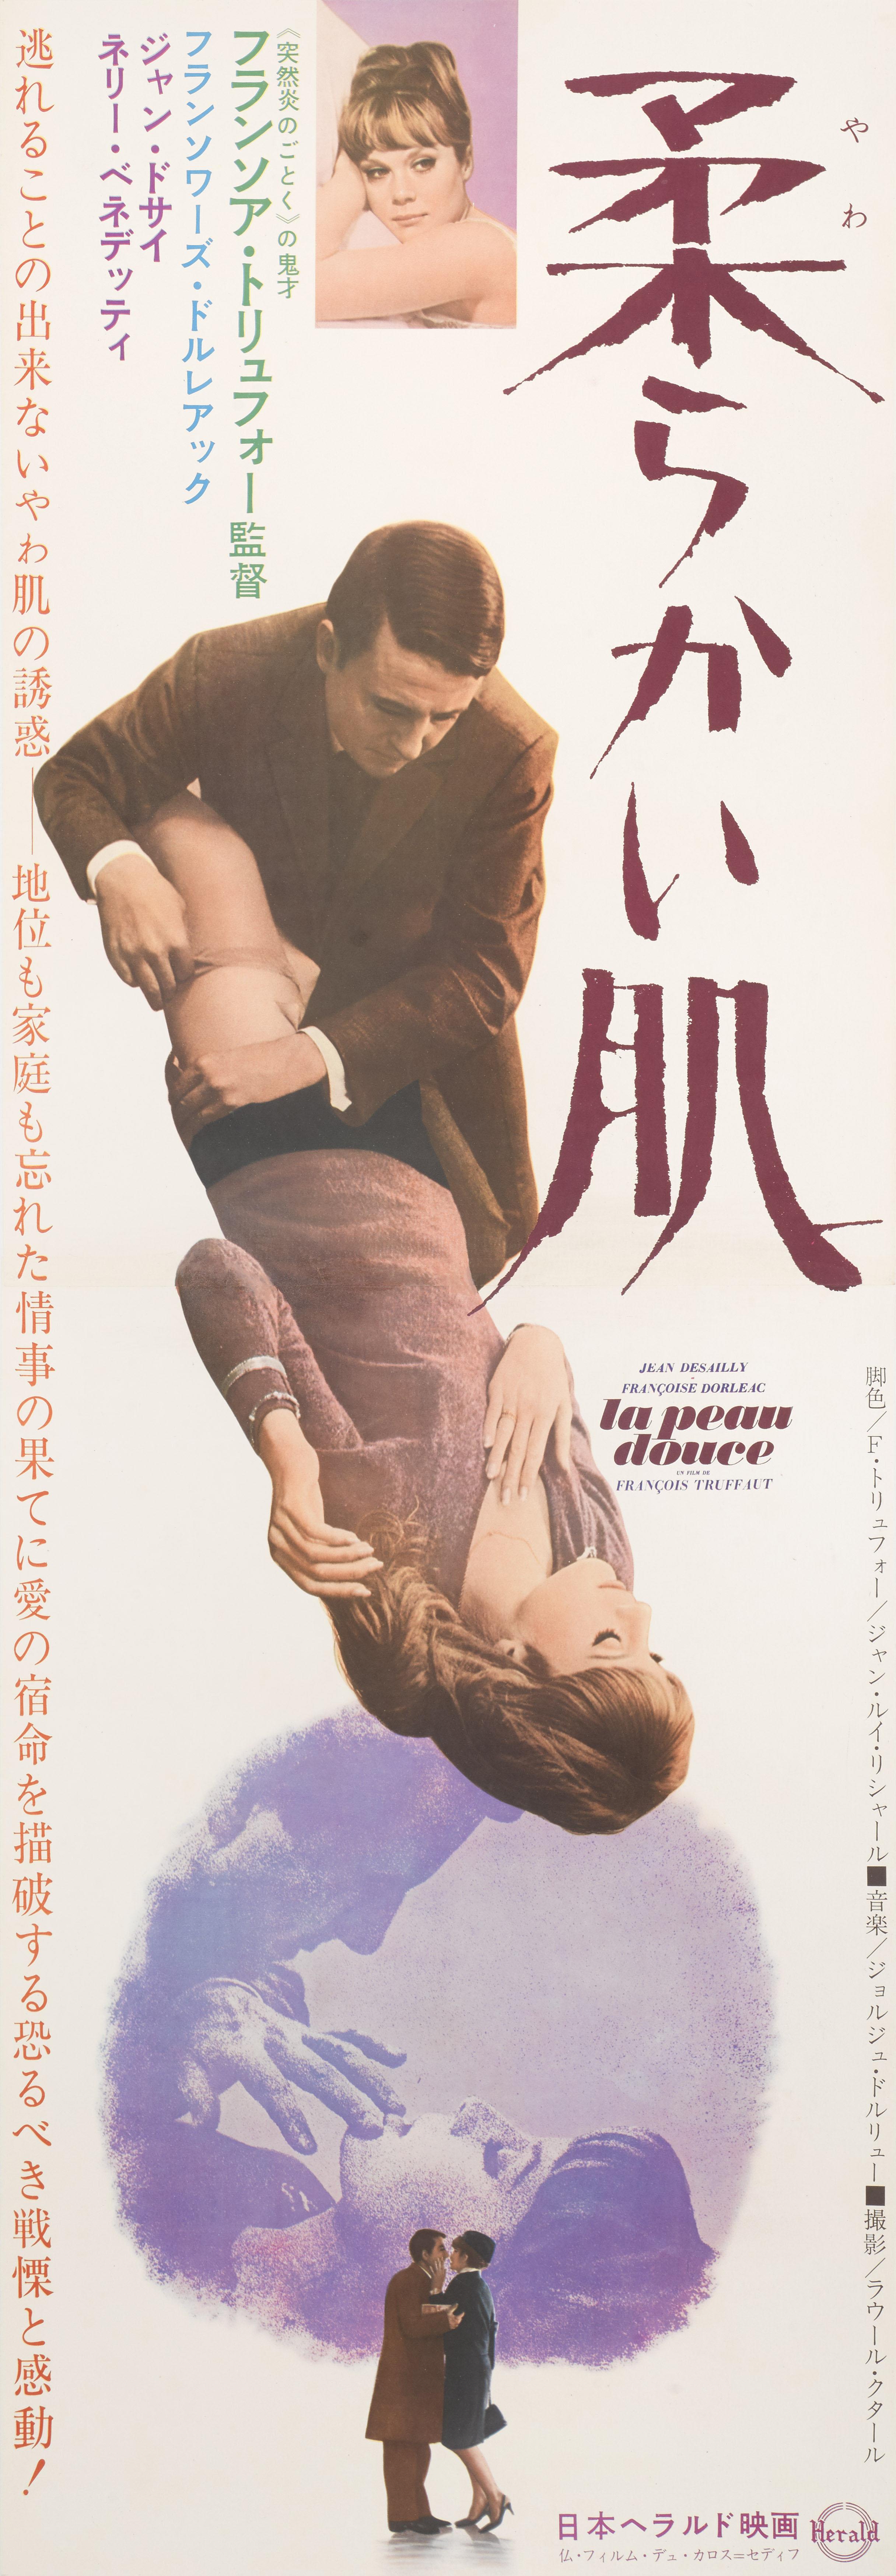 Original Japanese film poster for the 1964 French New Wave film.
This film was directed by Francois Truffaut and stared Jean Desailly, Françoise Dorléac and Nelly Benedetti
This Japanese poster was created for the films first release in Japan in